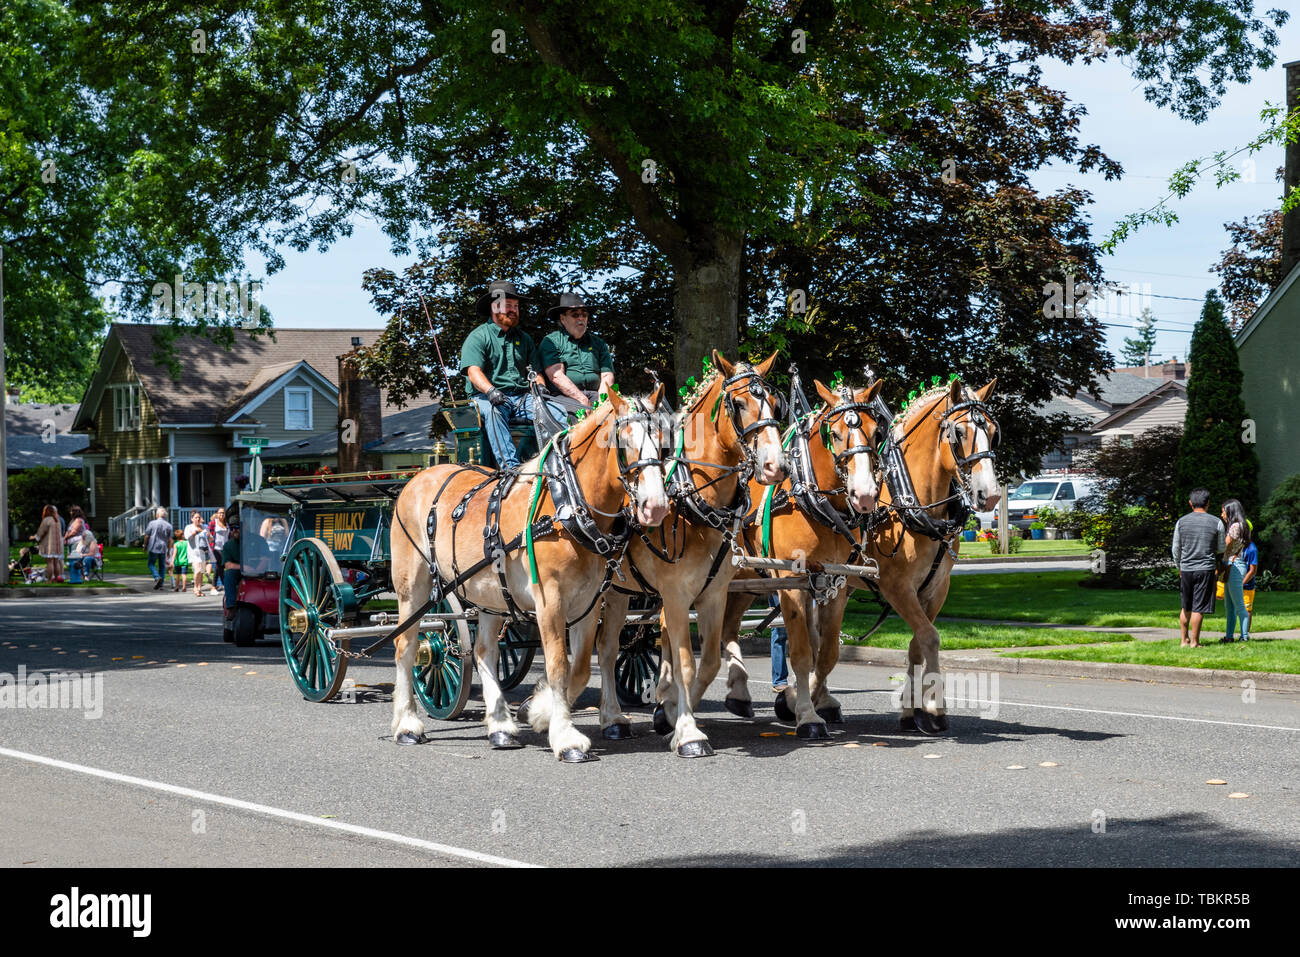 Horse drawn wagon from Milky Way Transport in the 2019 Lynden Farmers